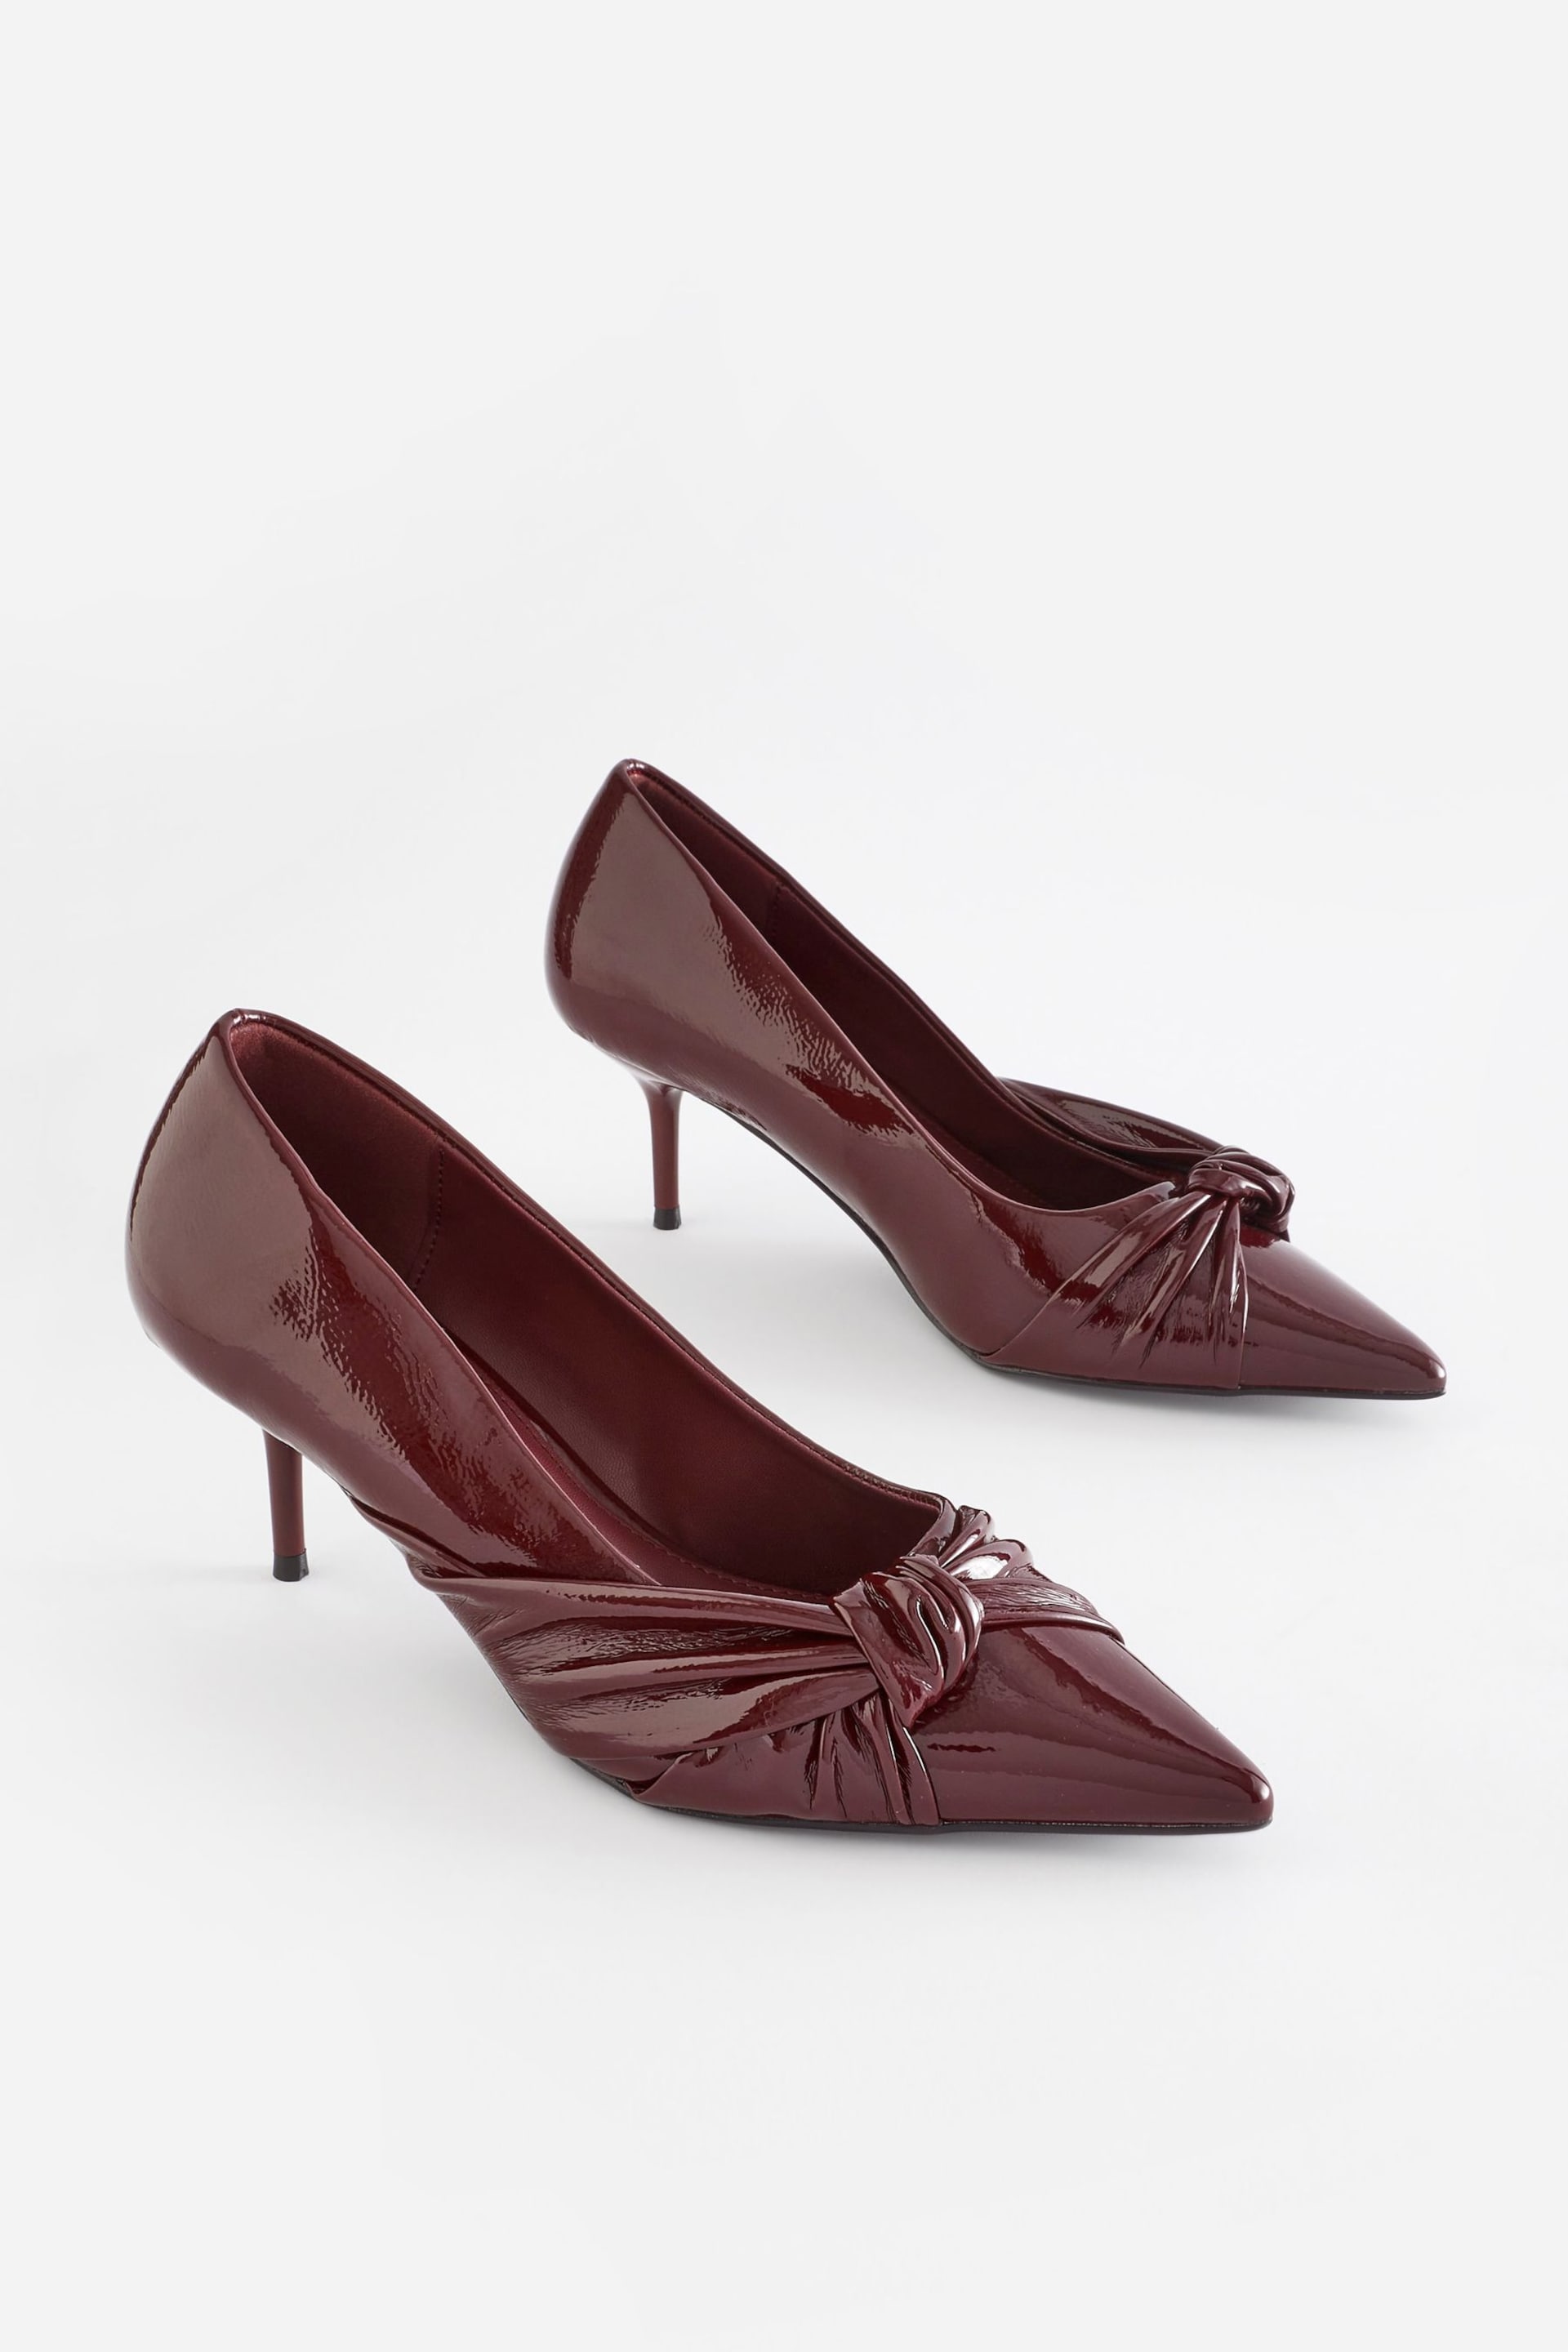 Berry Red Forever Comfort® Asymmetric Bow Kitten Heels - Image 5 of 11